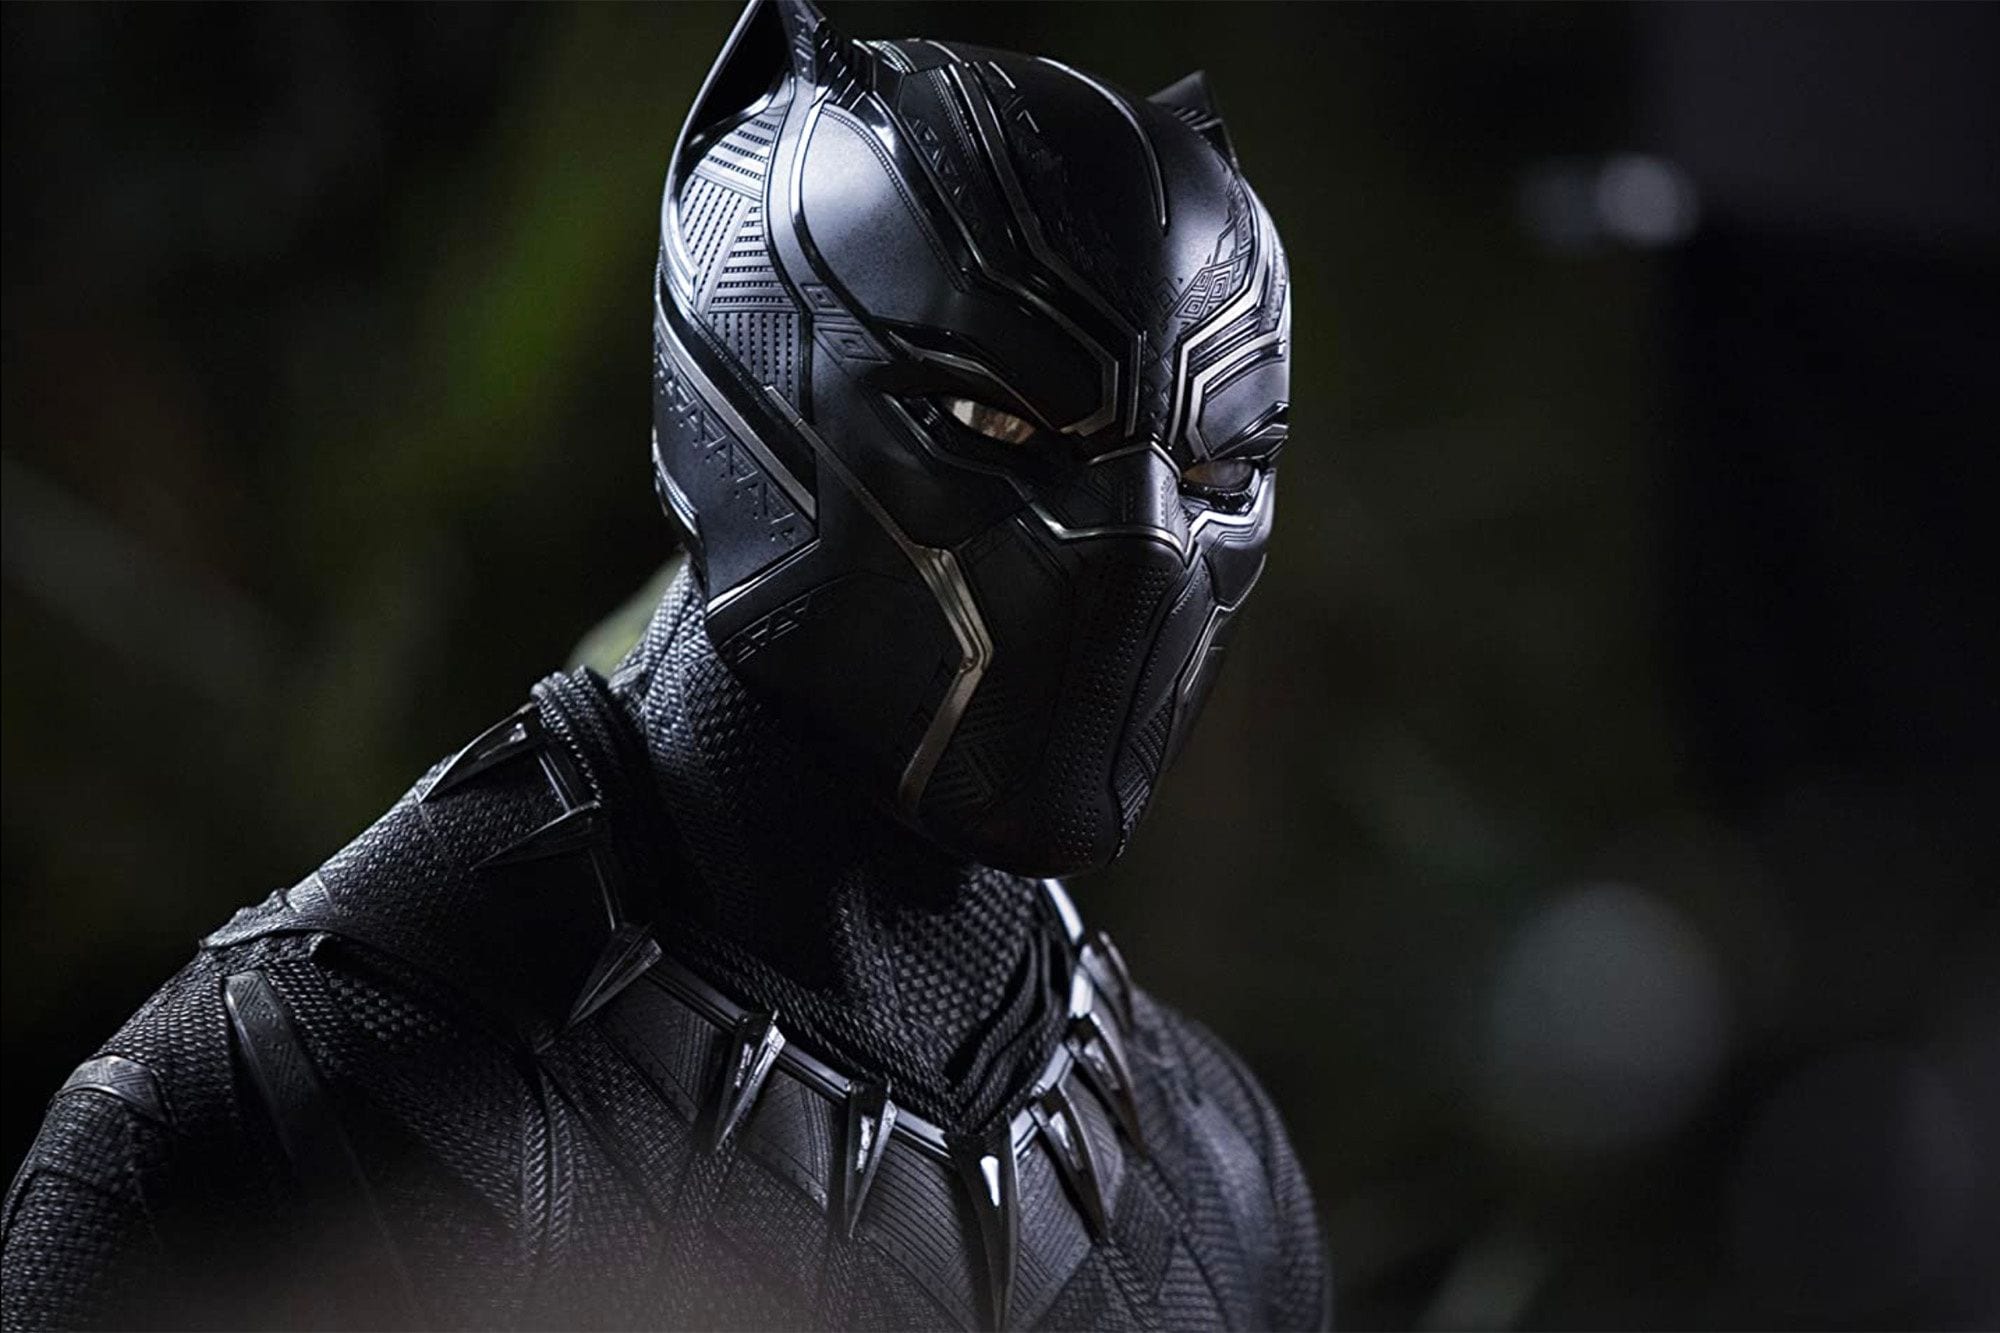 Marvel’s ‘Black Panther’ Has Its Claws in the Zeitgeist